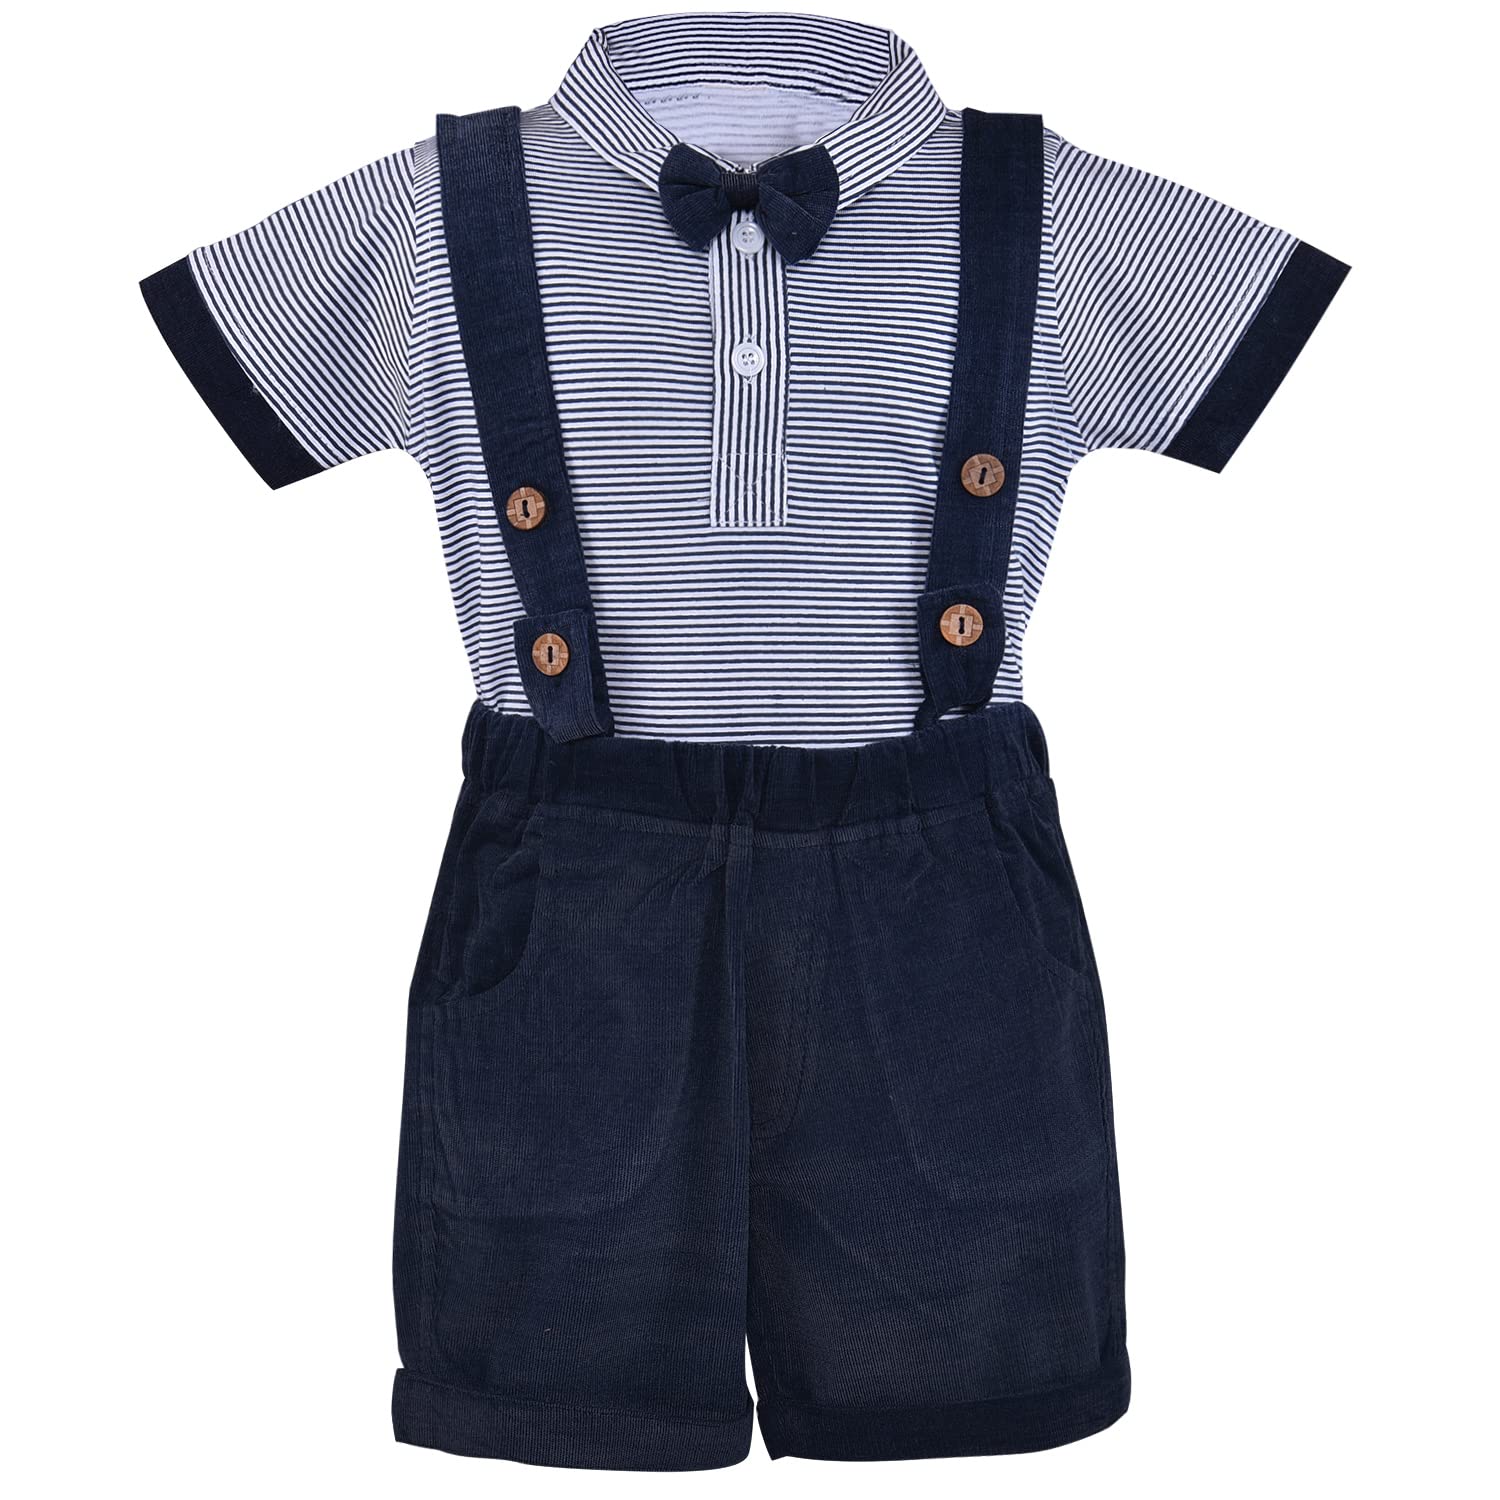 Jeans Overall Dress – Ourkids